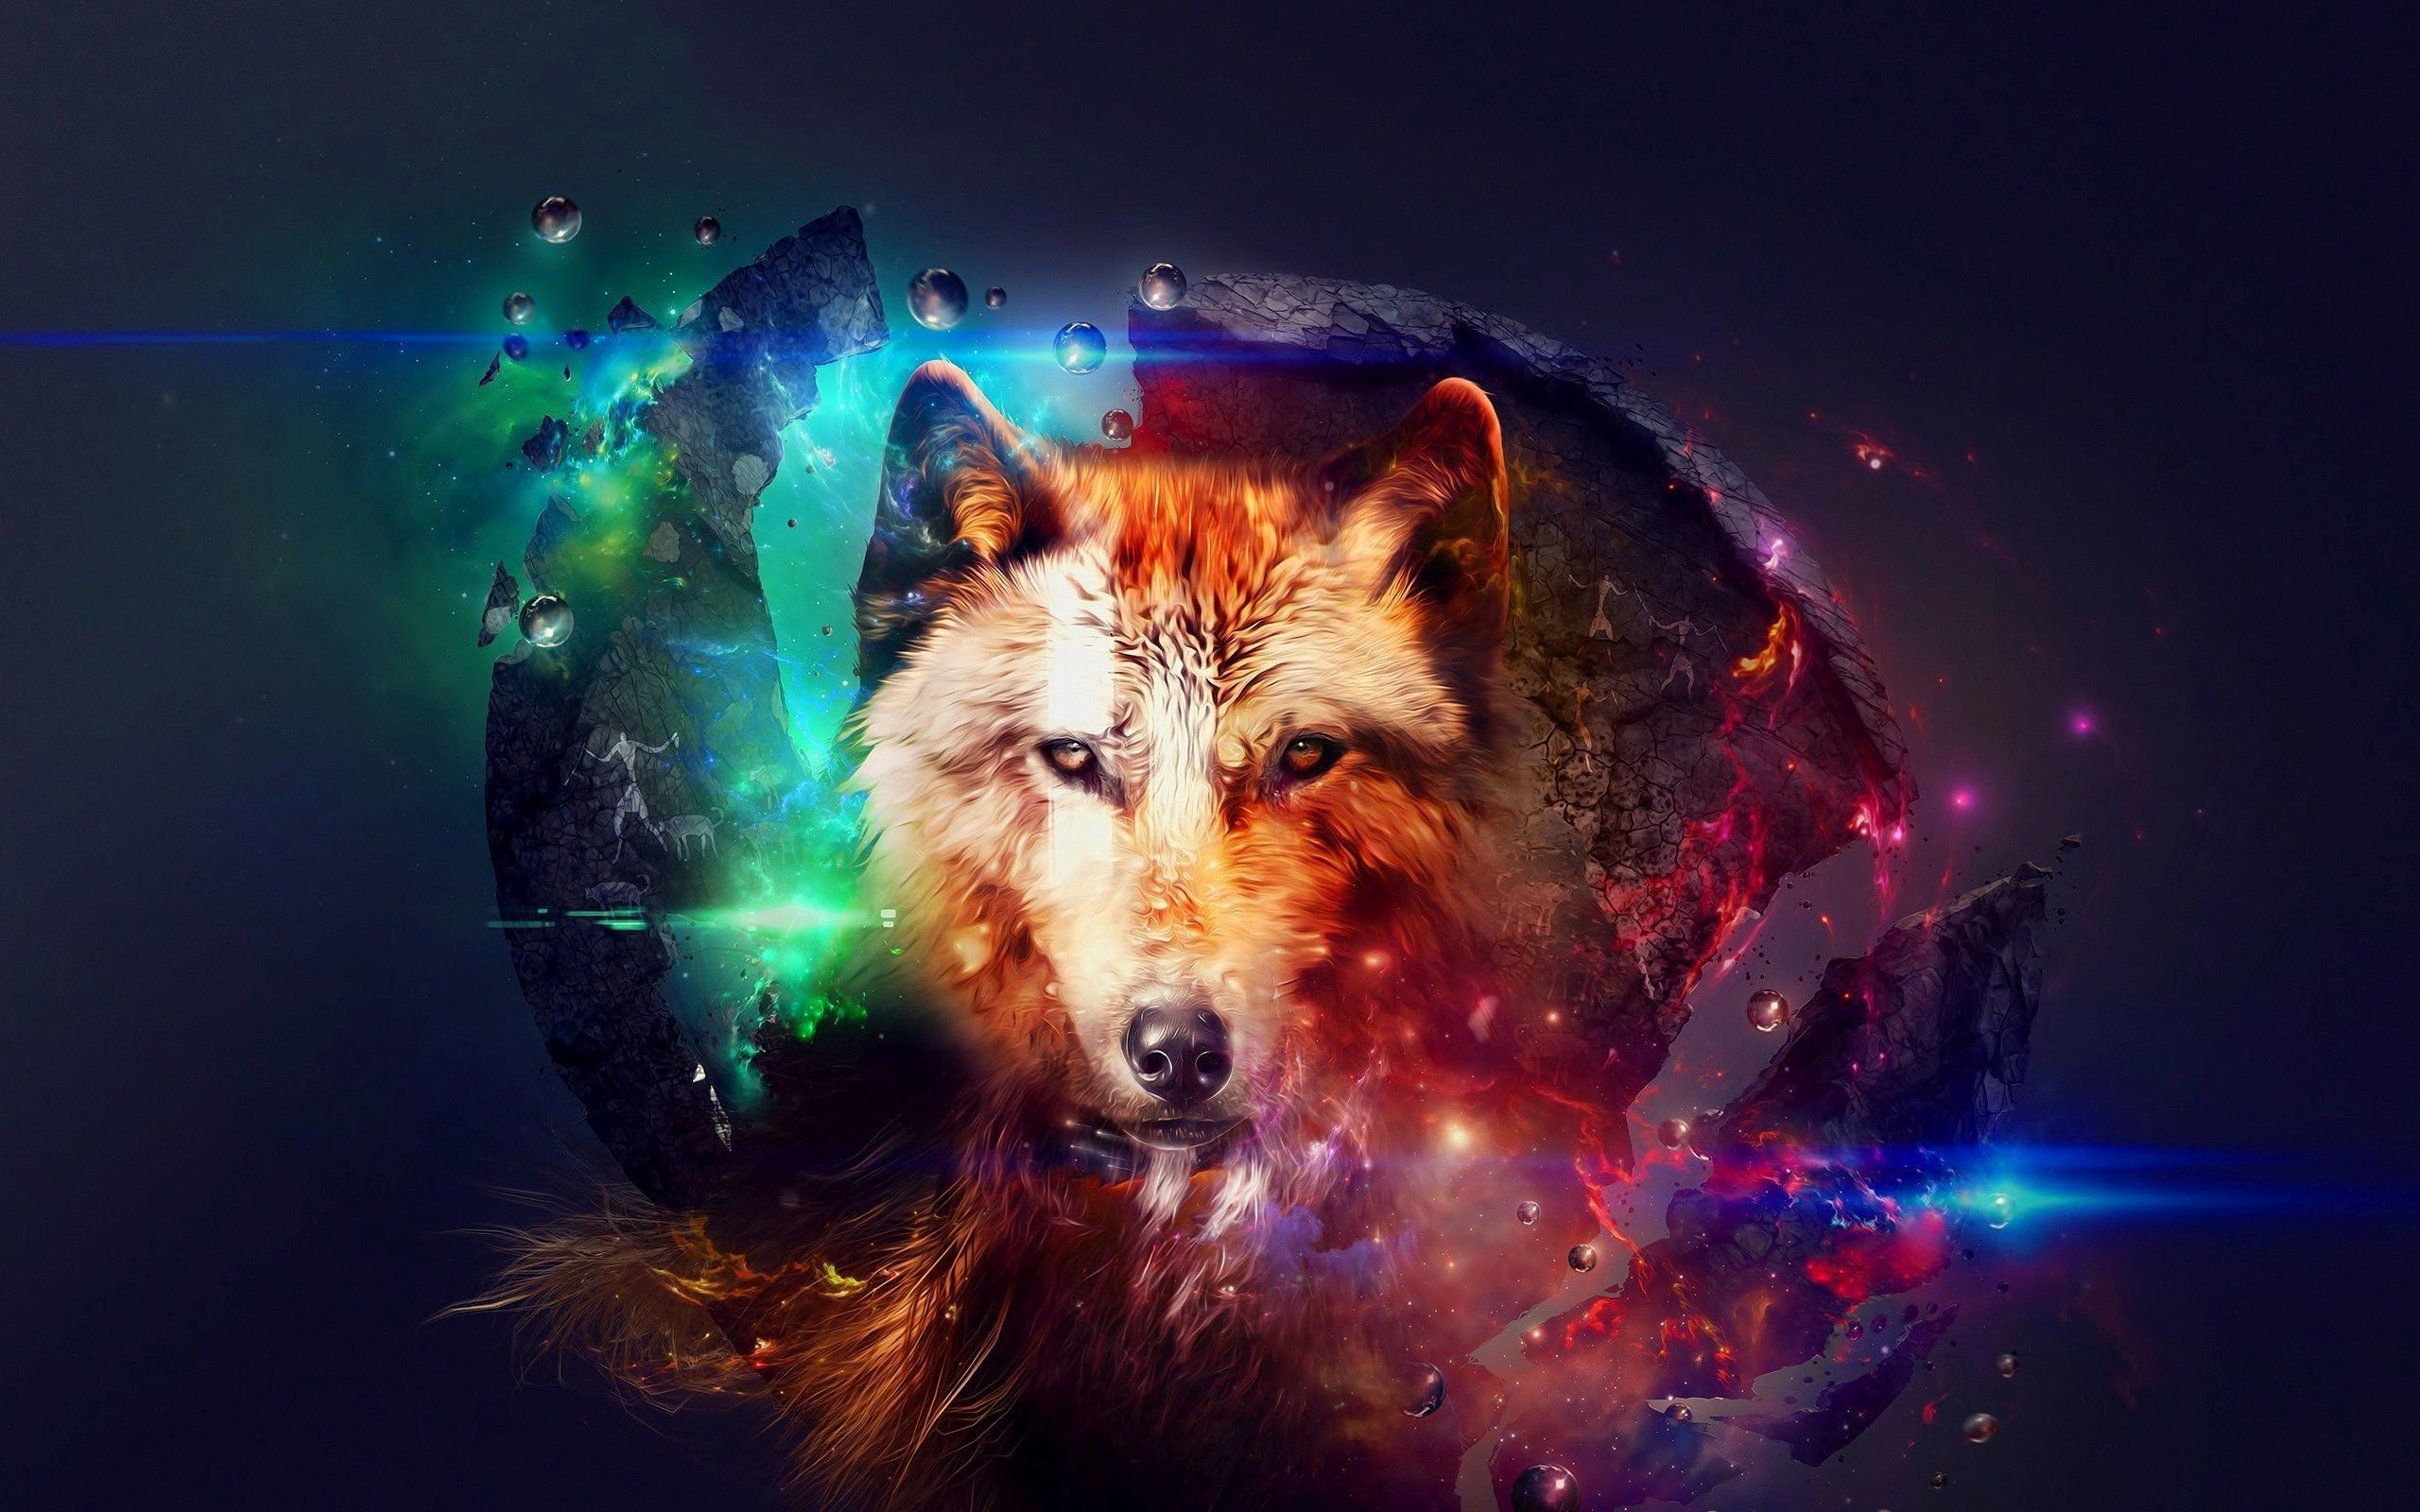 Galaxy Wolves